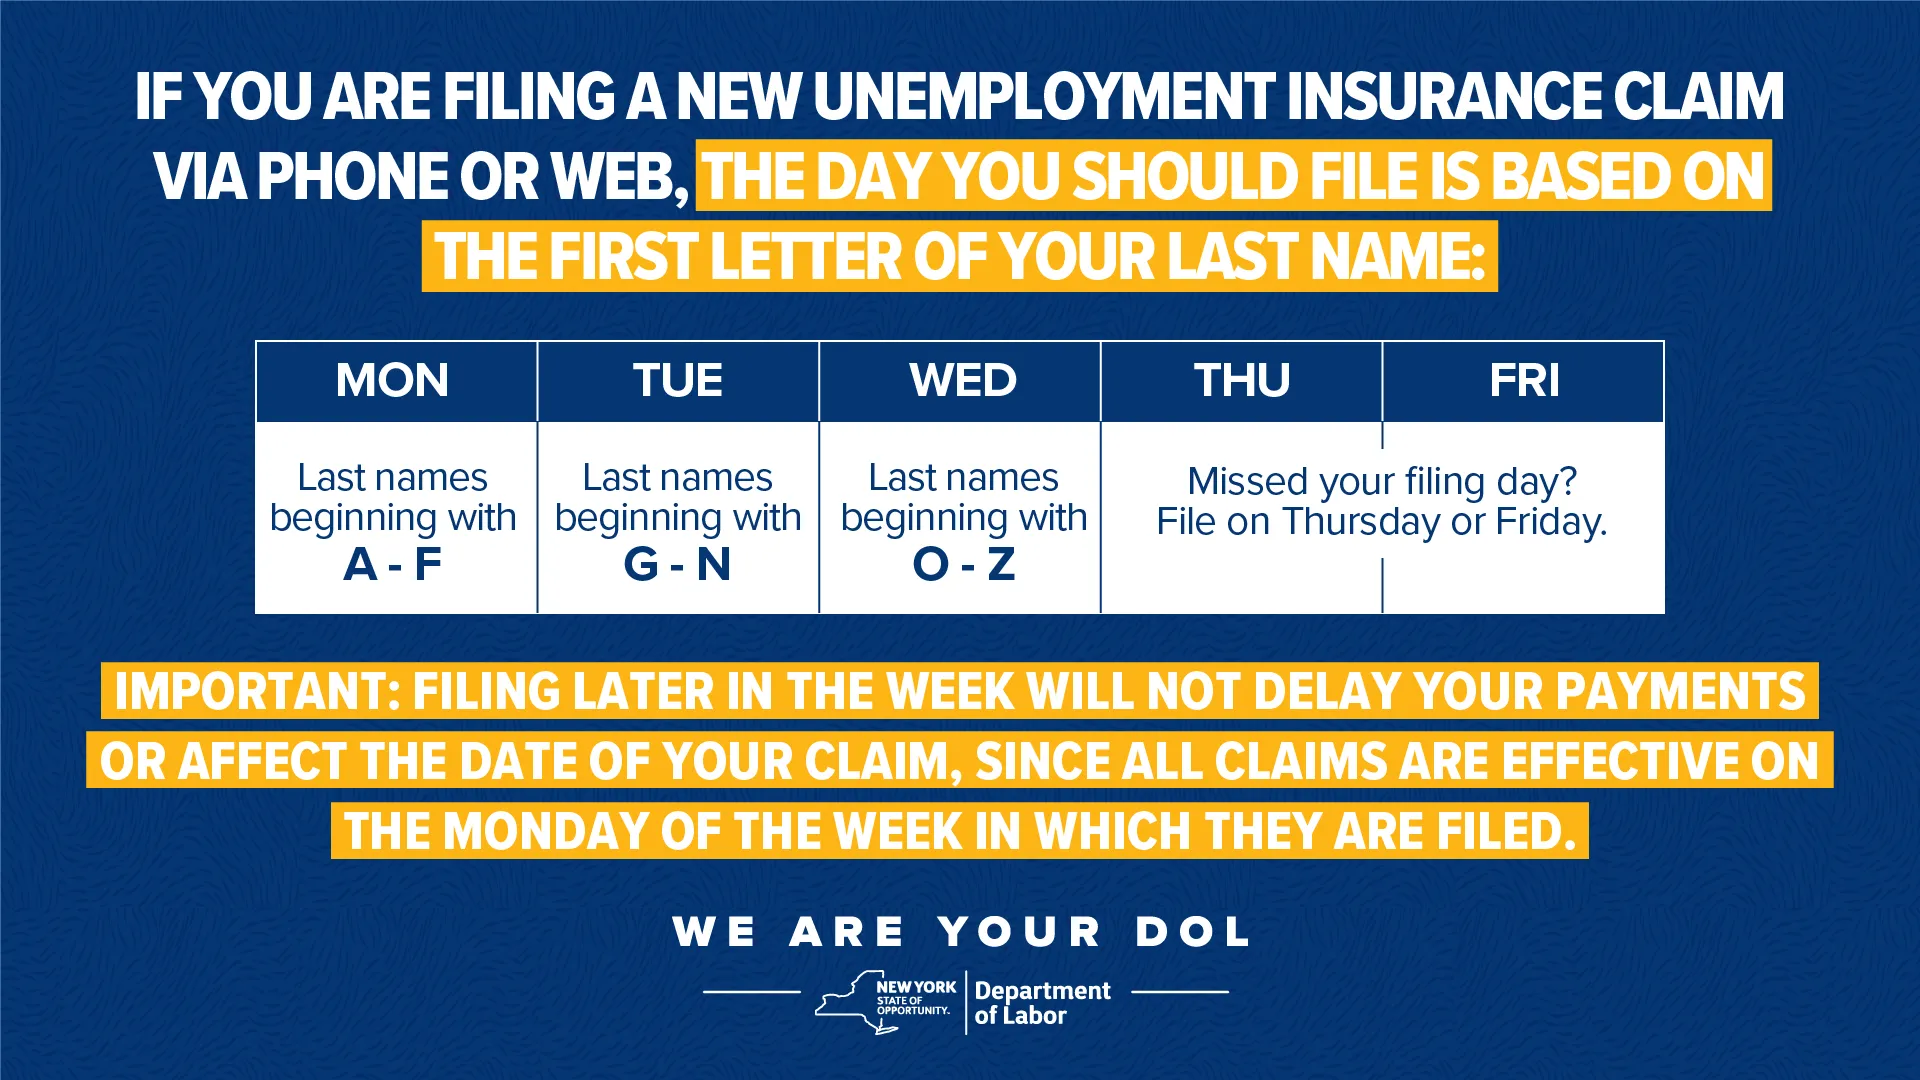 graphic about filing unemployment insurance claim in nys